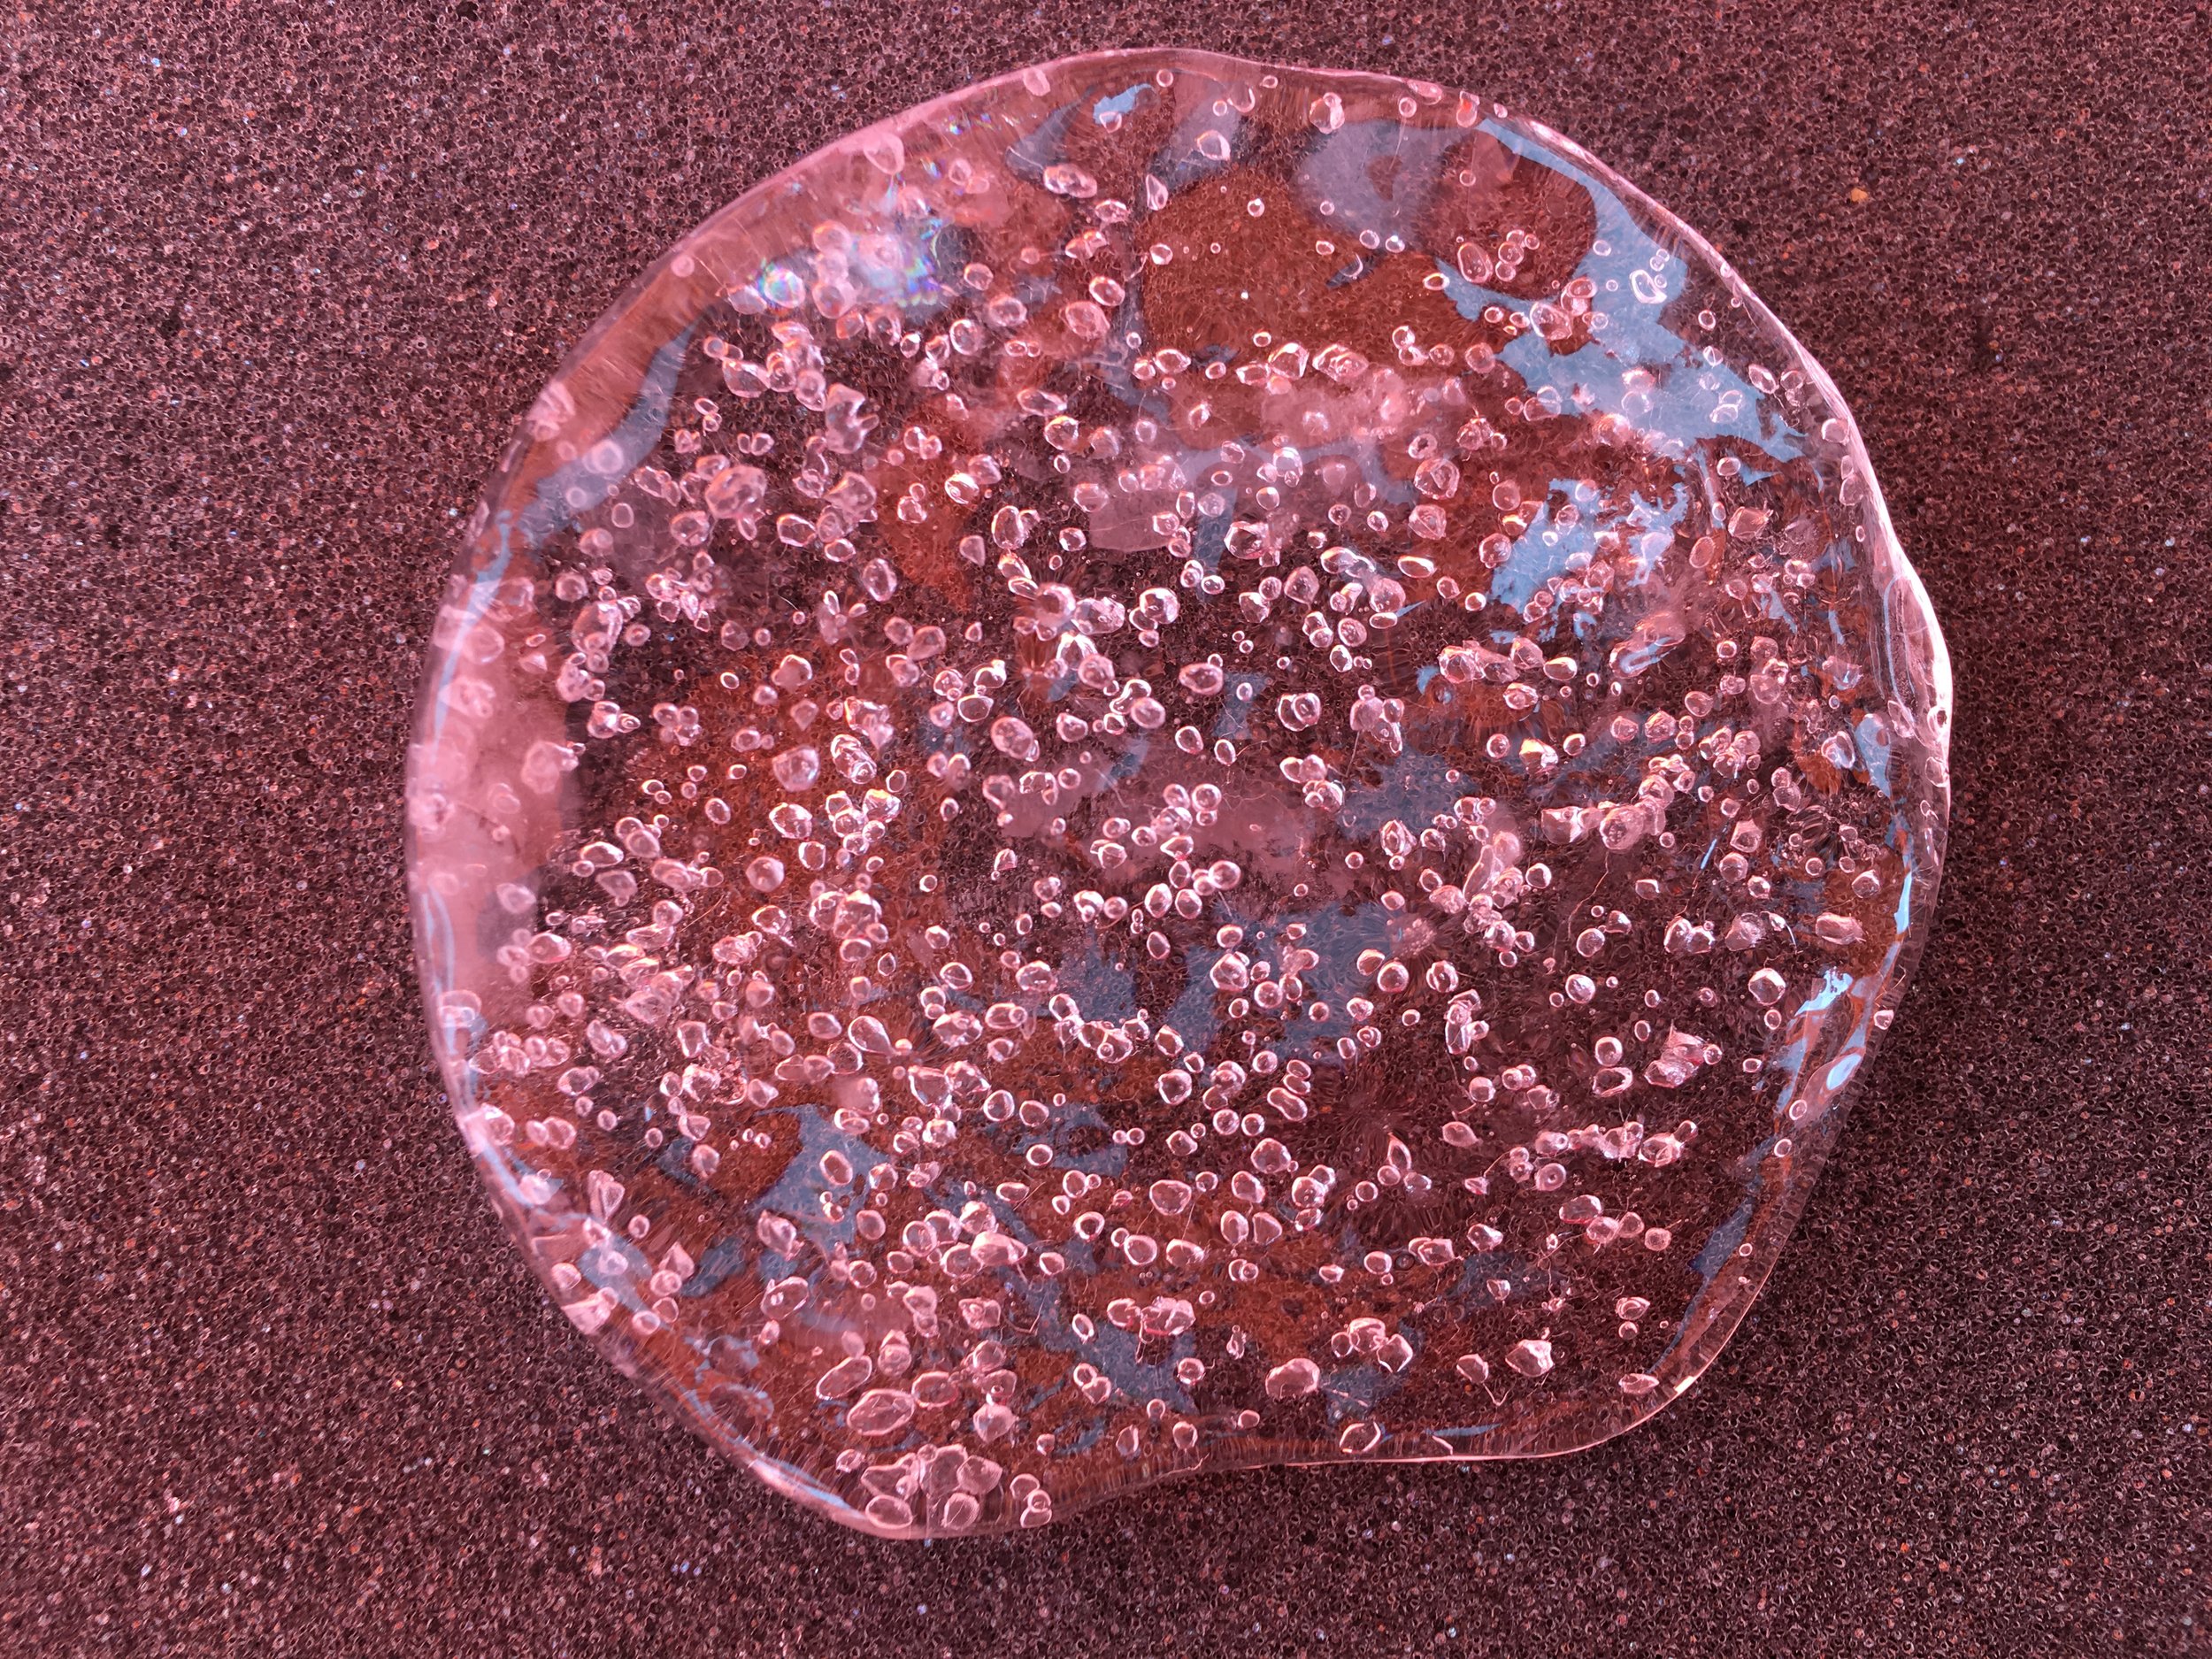 Fossil air inside bubbles